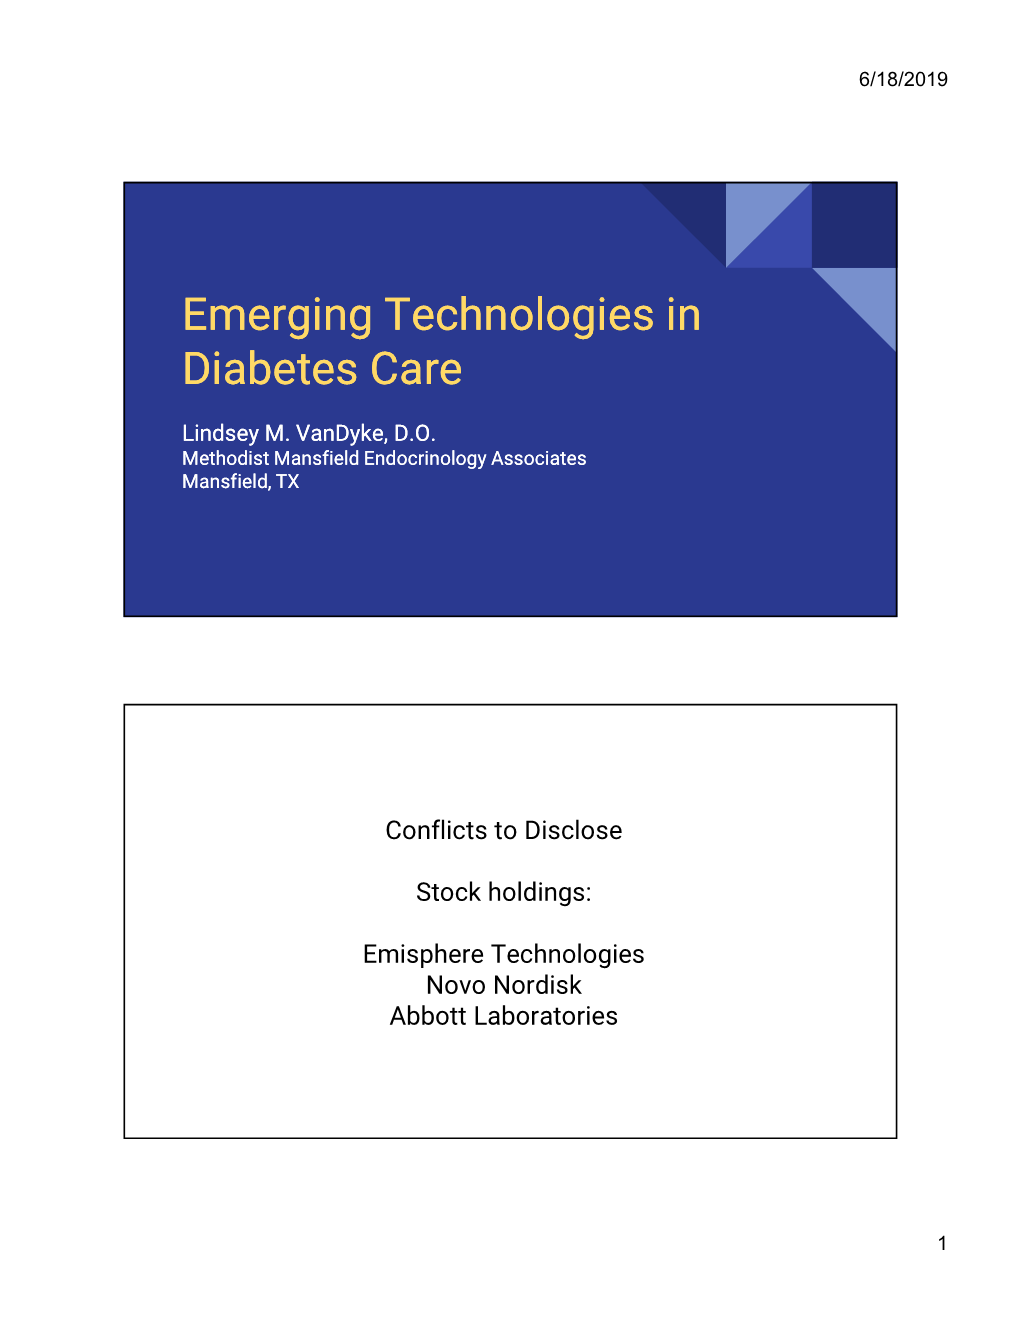 Emerging Technologies in Diabetes Care Emerging Technologies In